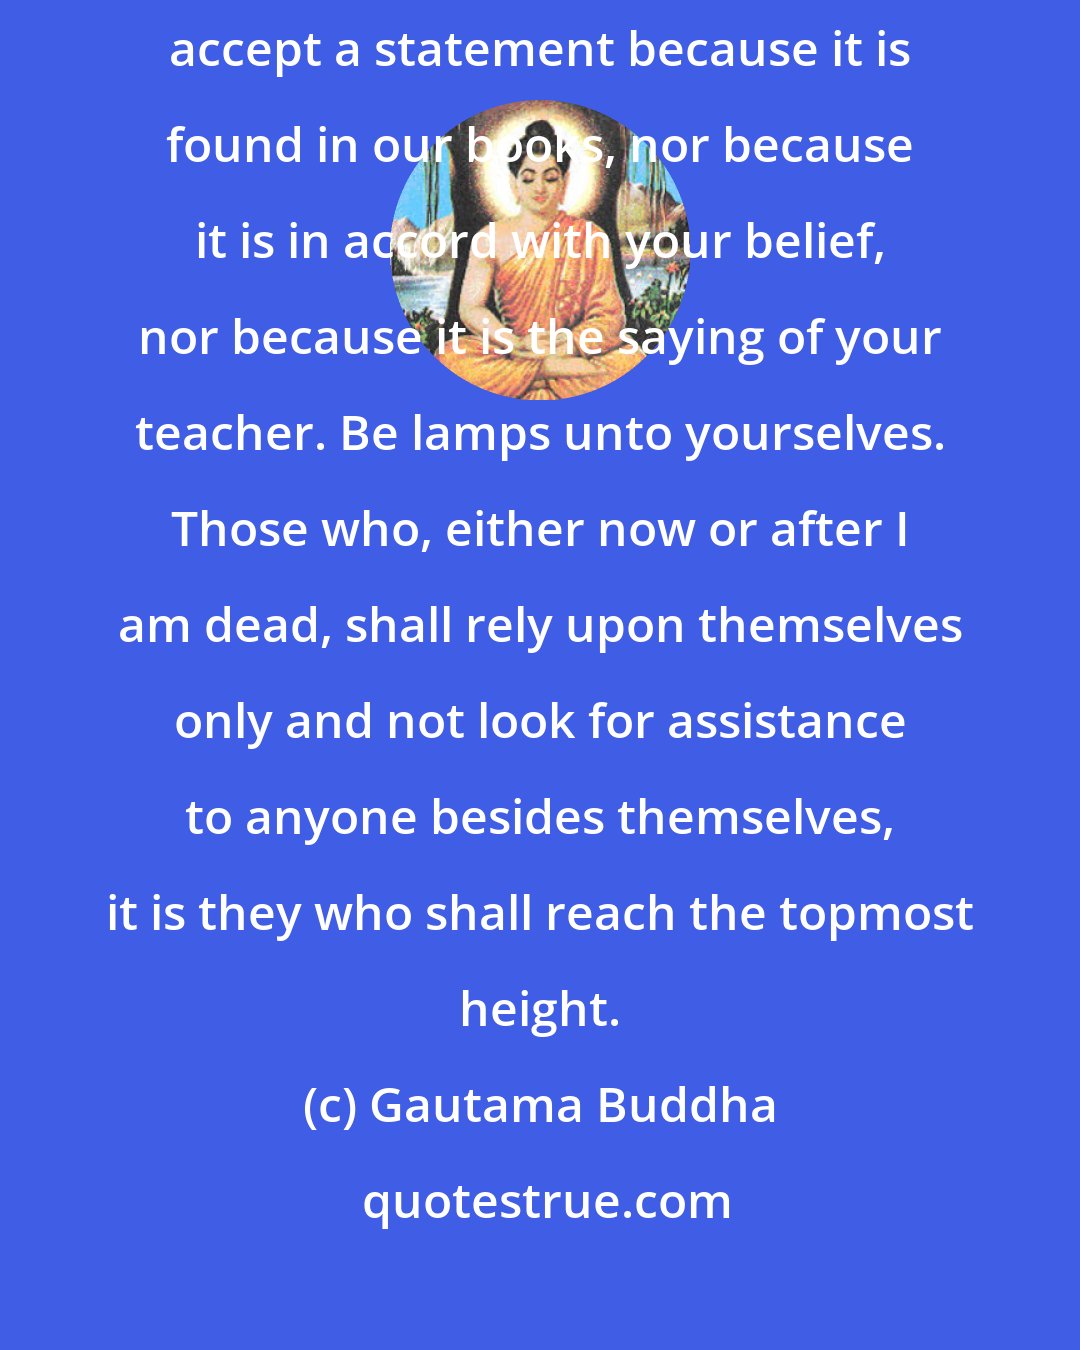 Gautama Buddha: Do not accept what you hear by report, do not accept tradition, do not accept a statement because it is found in our books, nor because it is in accord with your belief, nor because it is the saying of your teacher. Be lamps unto yourselves. Those who, either now or after I am dead, shall rely upon themselves only and not look for assistance to anyone besides themselves, it is they who shall reach the topmost height.